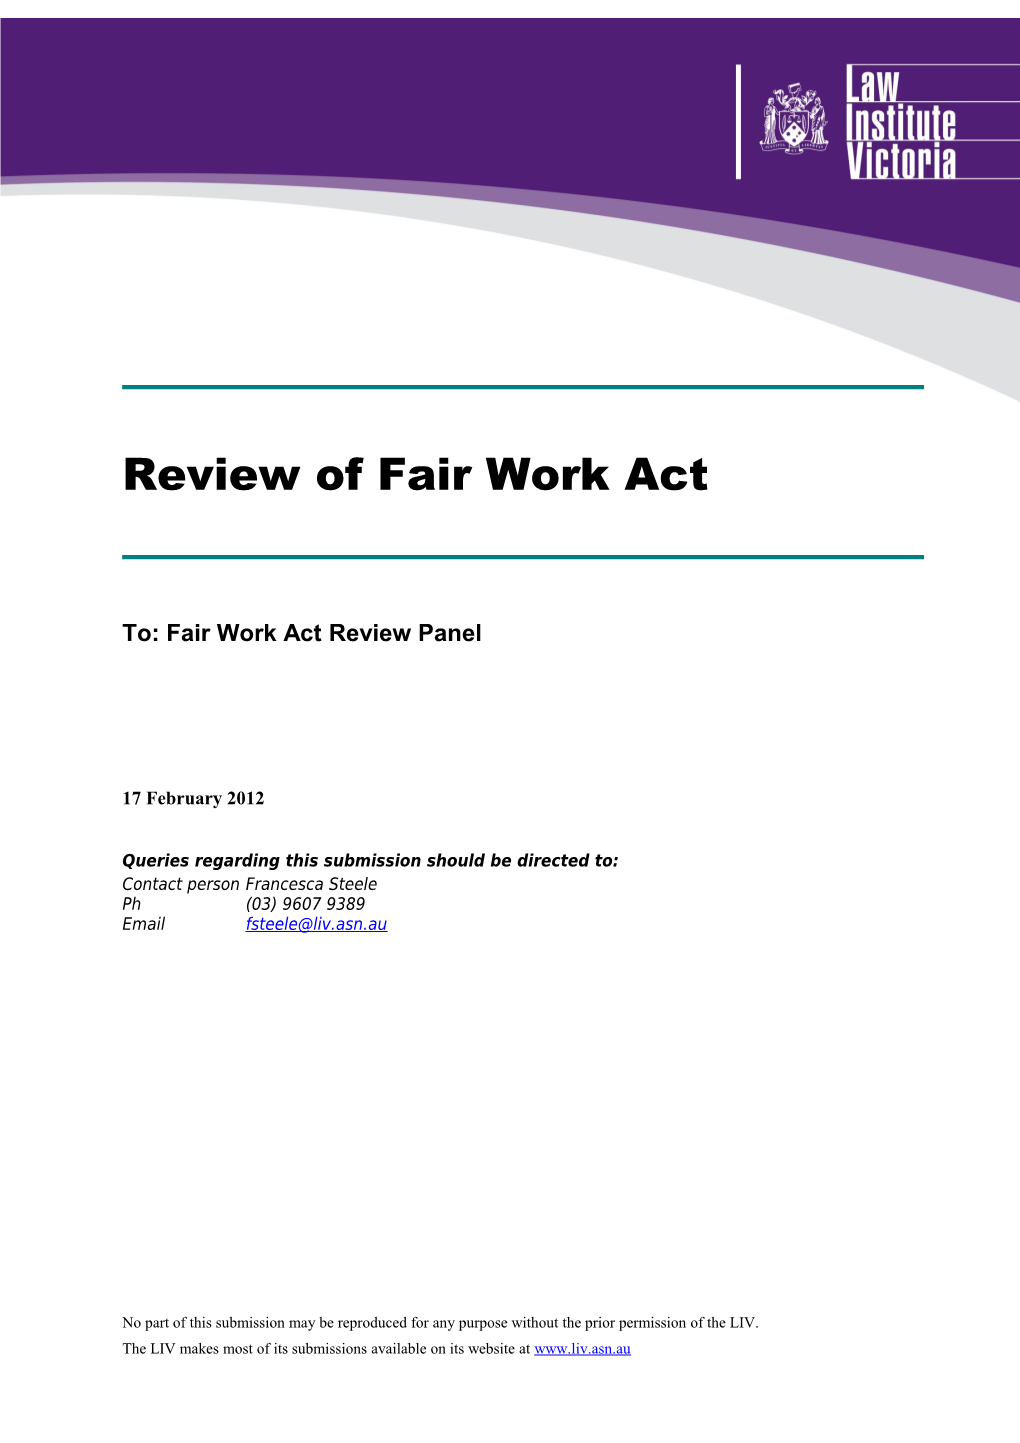 To: Fair Work Act Review Panel